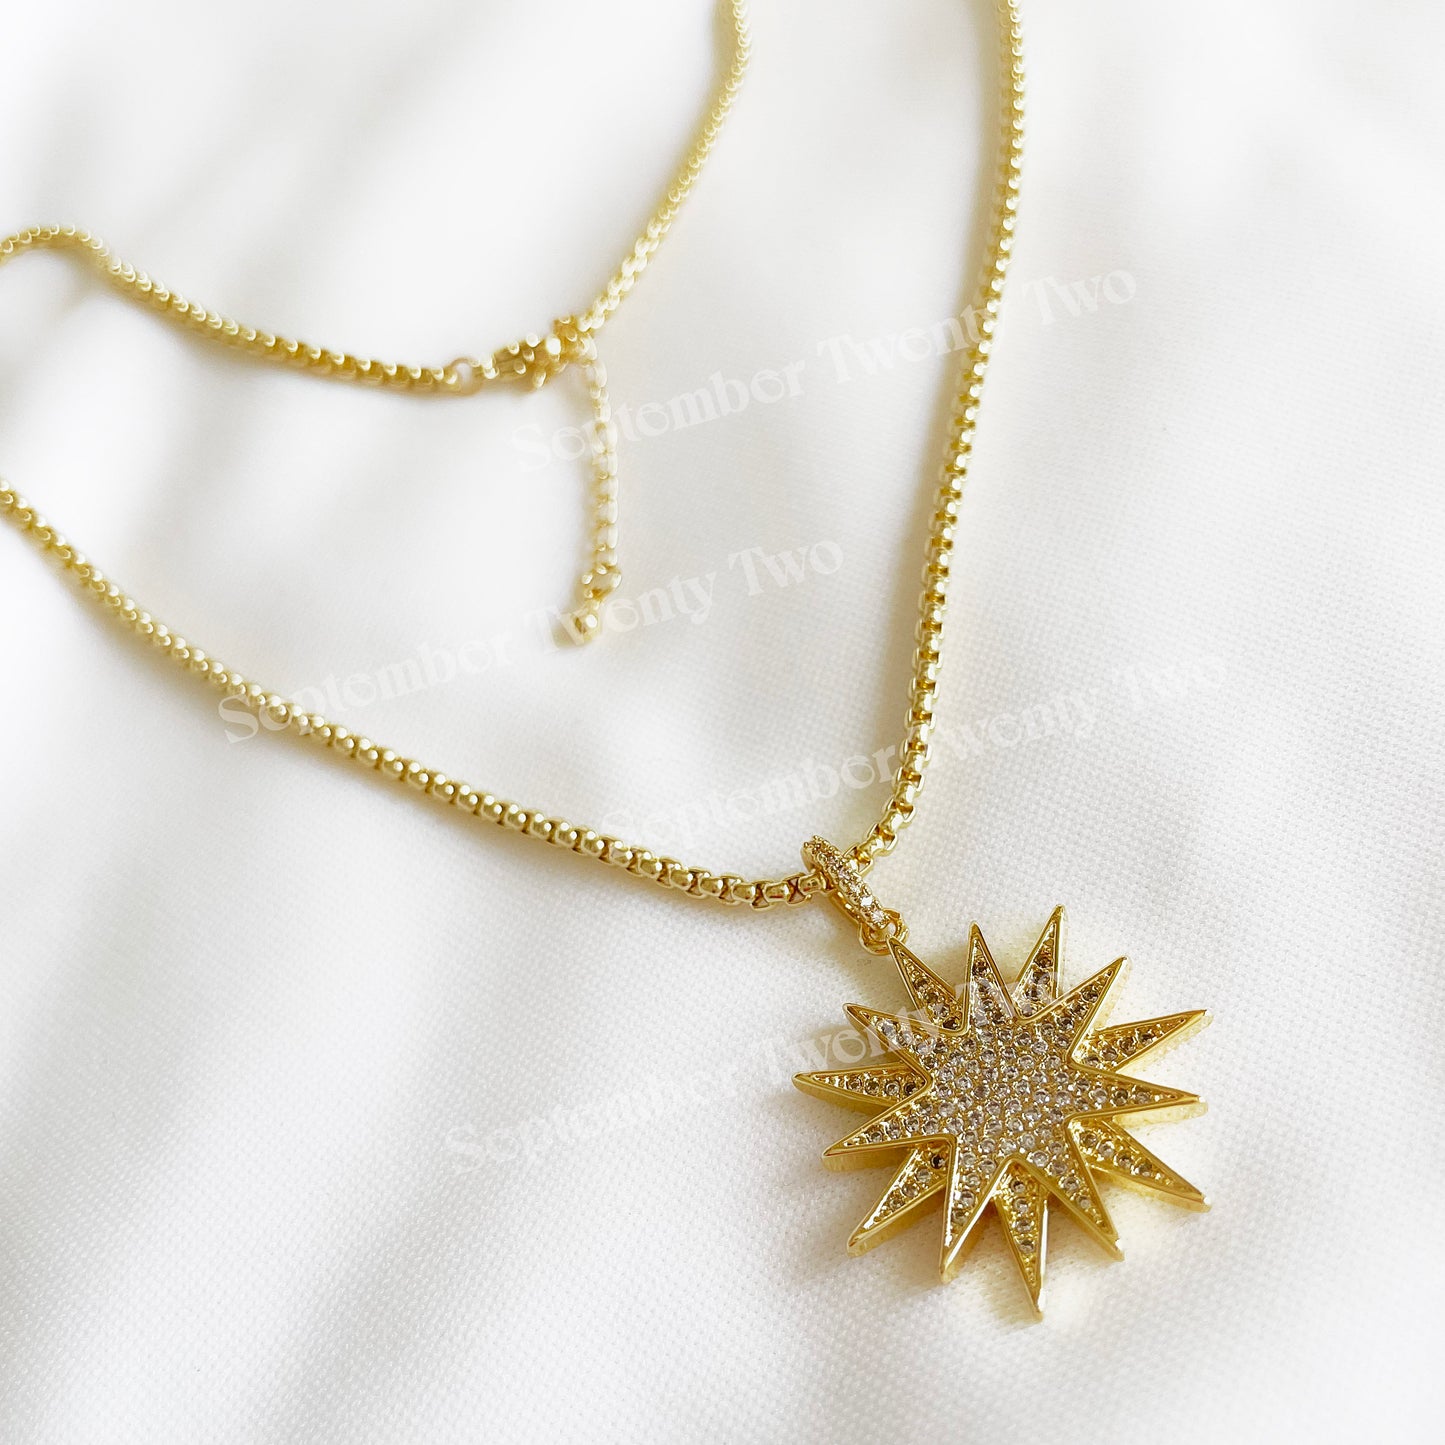 Starburst - Gold Plated Necklace